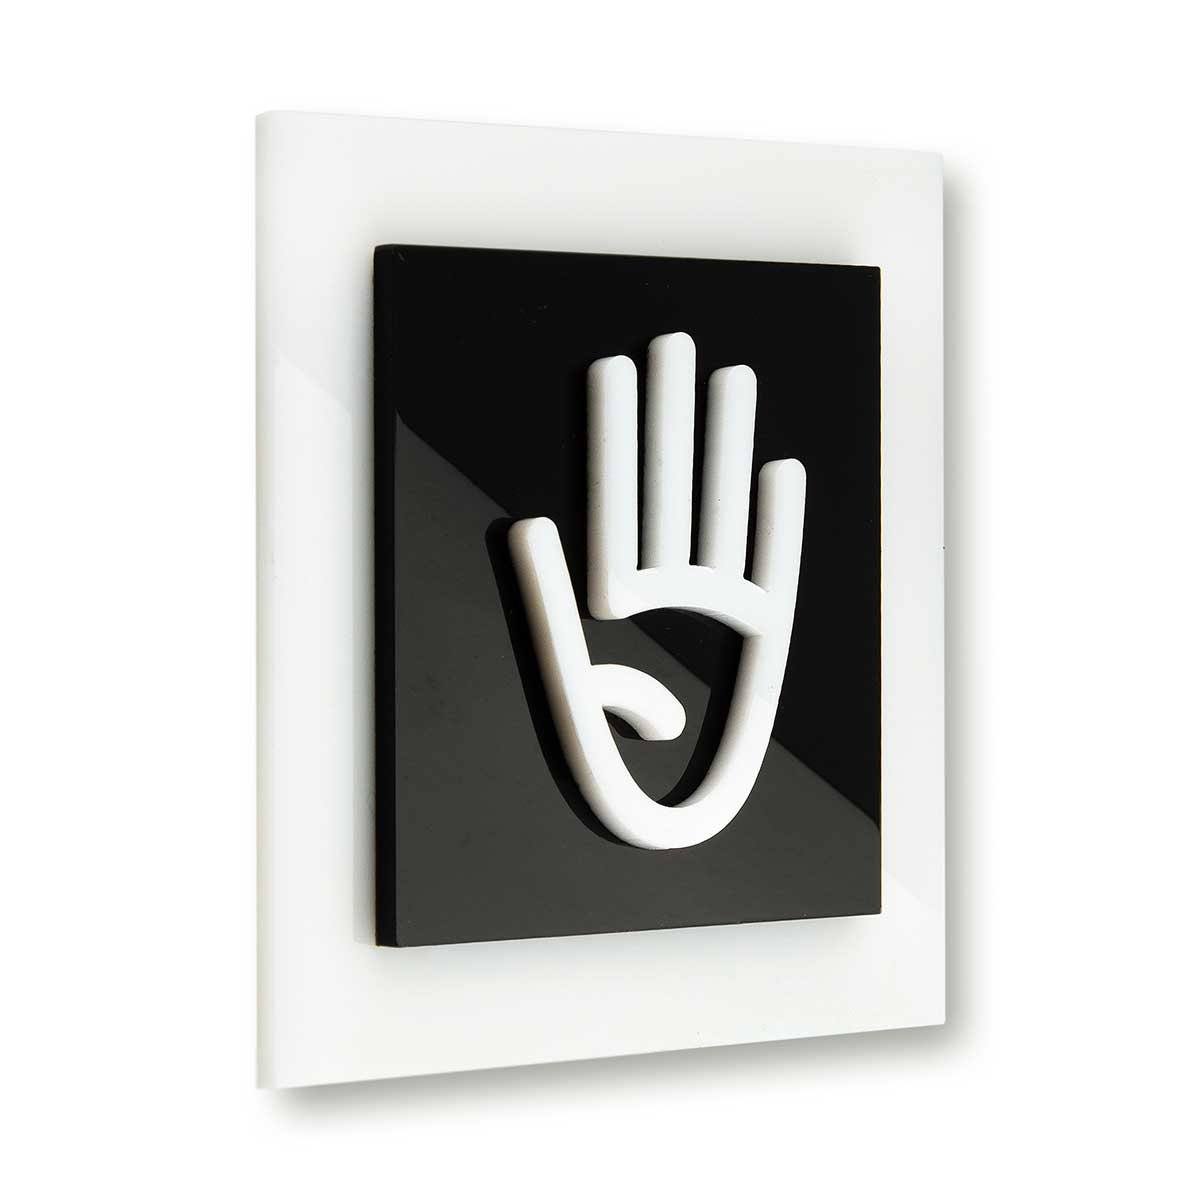 Acrylic Employees Only Door Sign black/white symbol Bsign